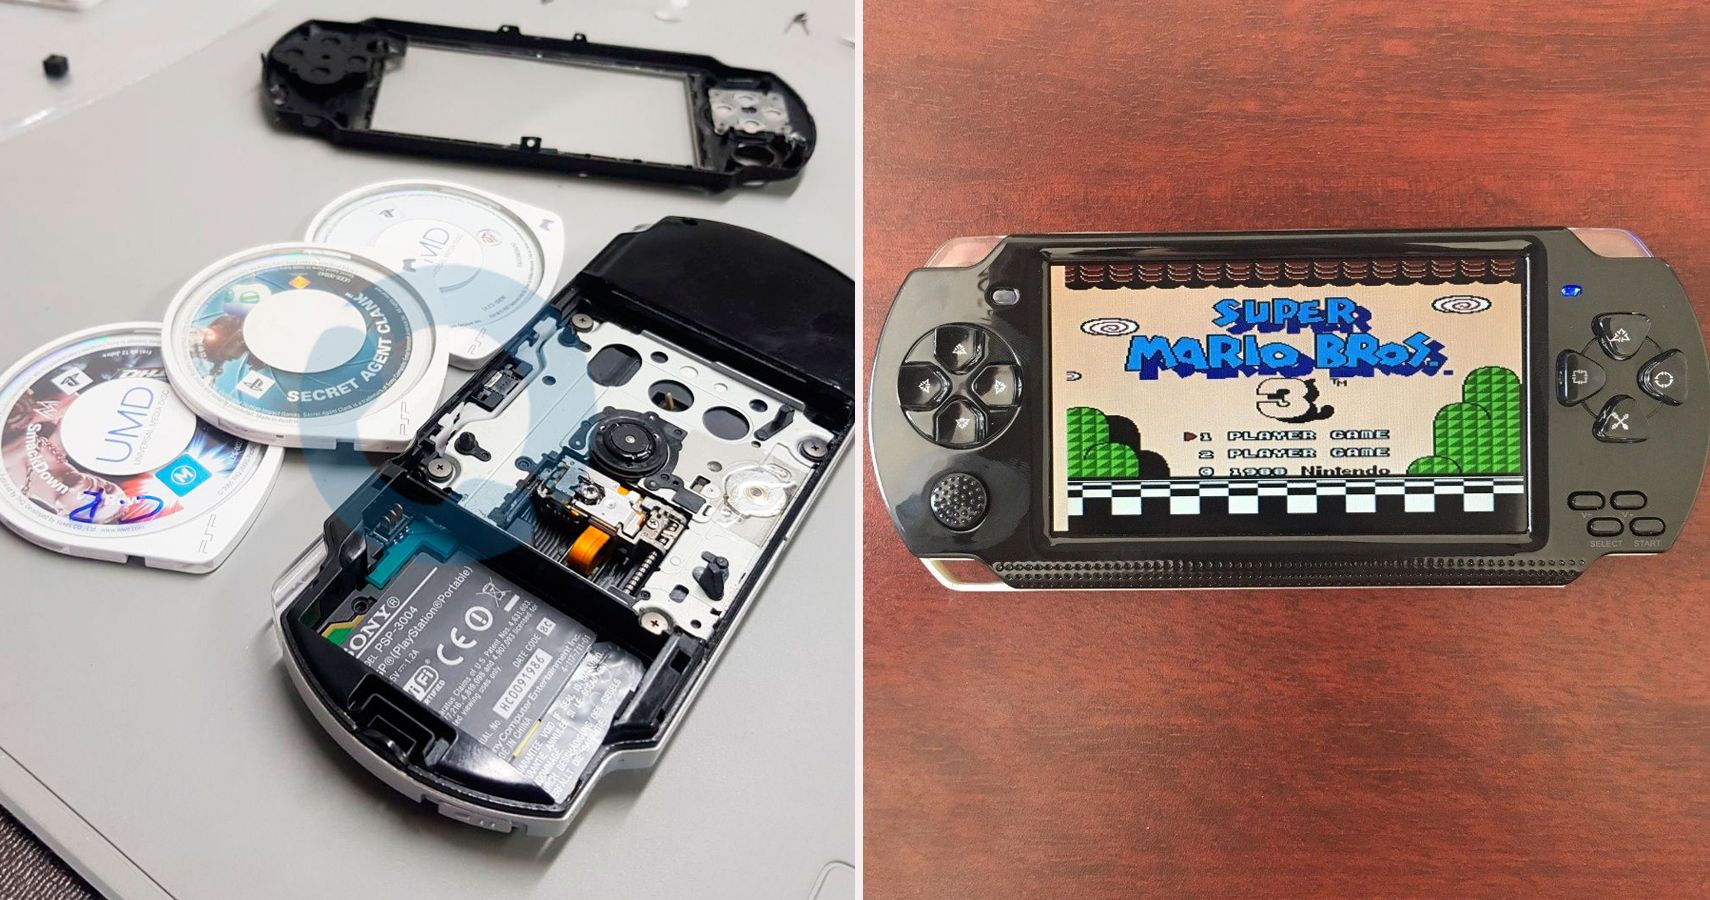 22 Hidden About PlayStation Portable Only True Know